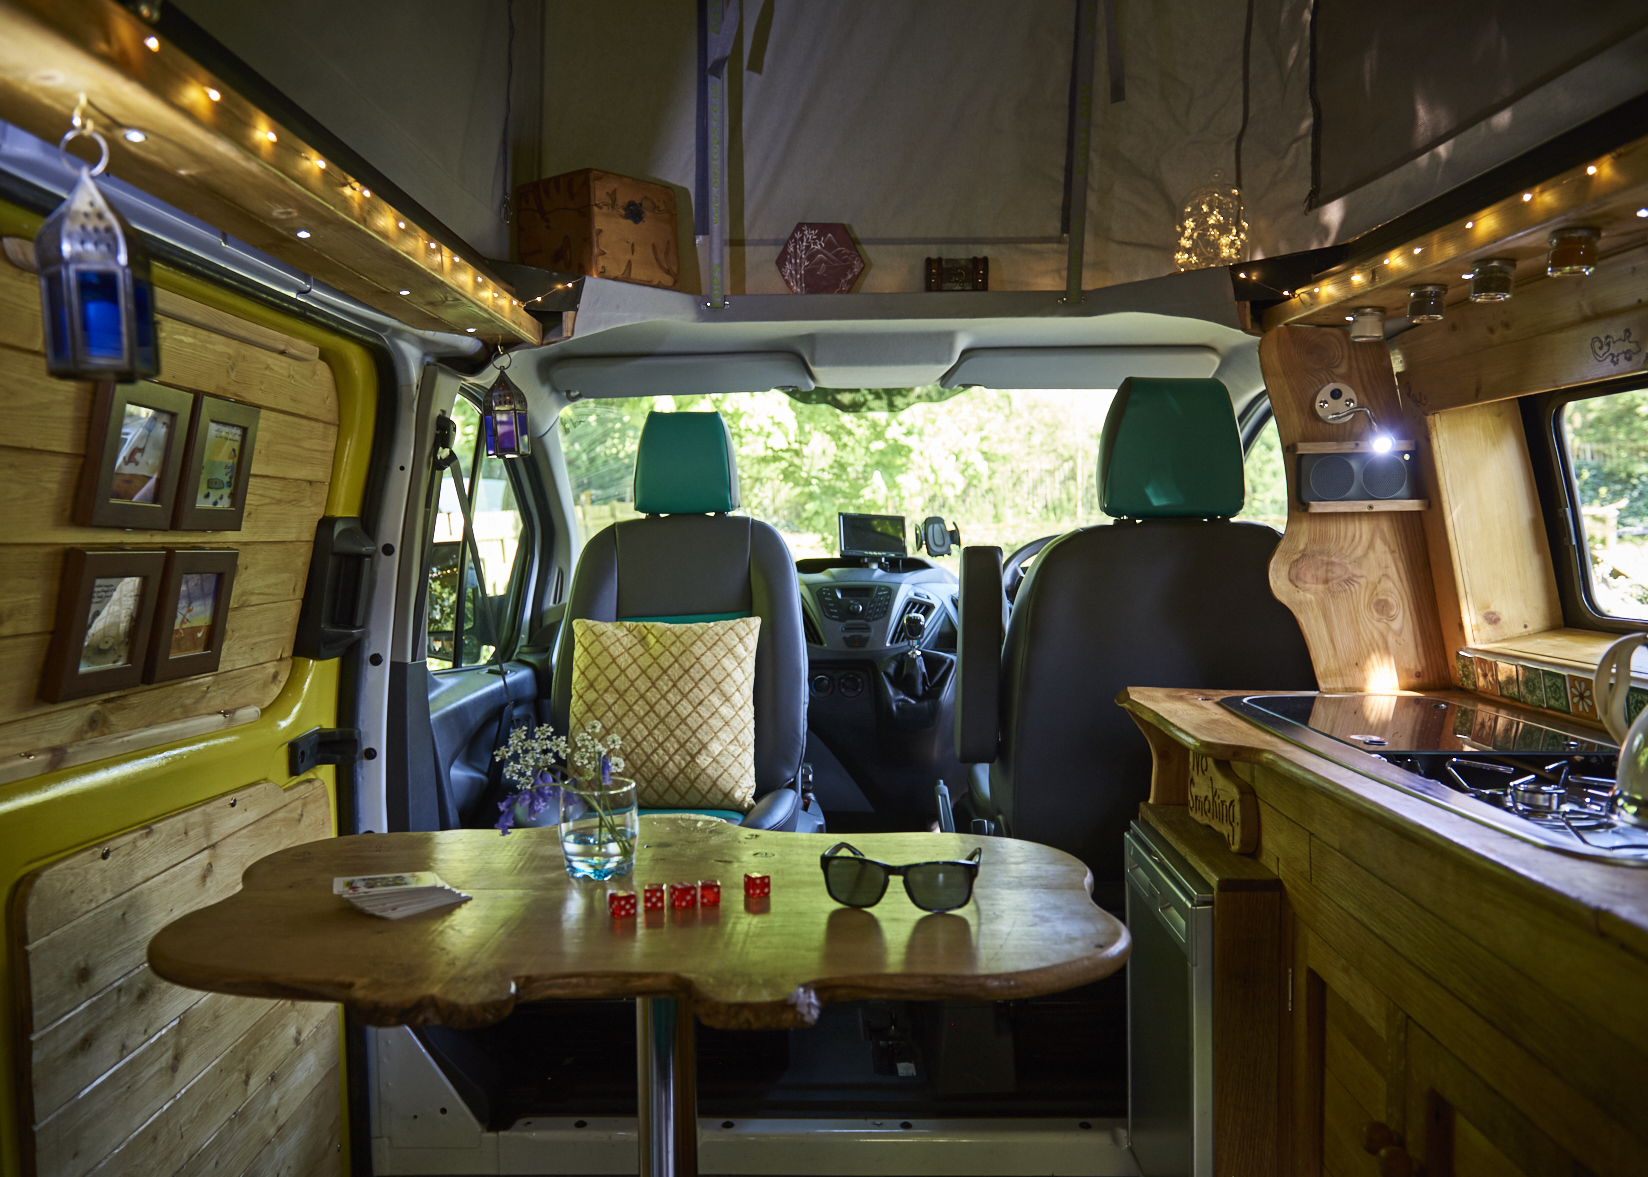 Interior of a cozy, well-lit camper van. The wooden table holds sunglasses, a candle, red dice, and a small vase with flowers. The front seats are upholstered in gray and teal. The cabinets and walls are wooden, adorned with string lights, small pictures, and miscellaneous items. Trees are visible through the front windshield.